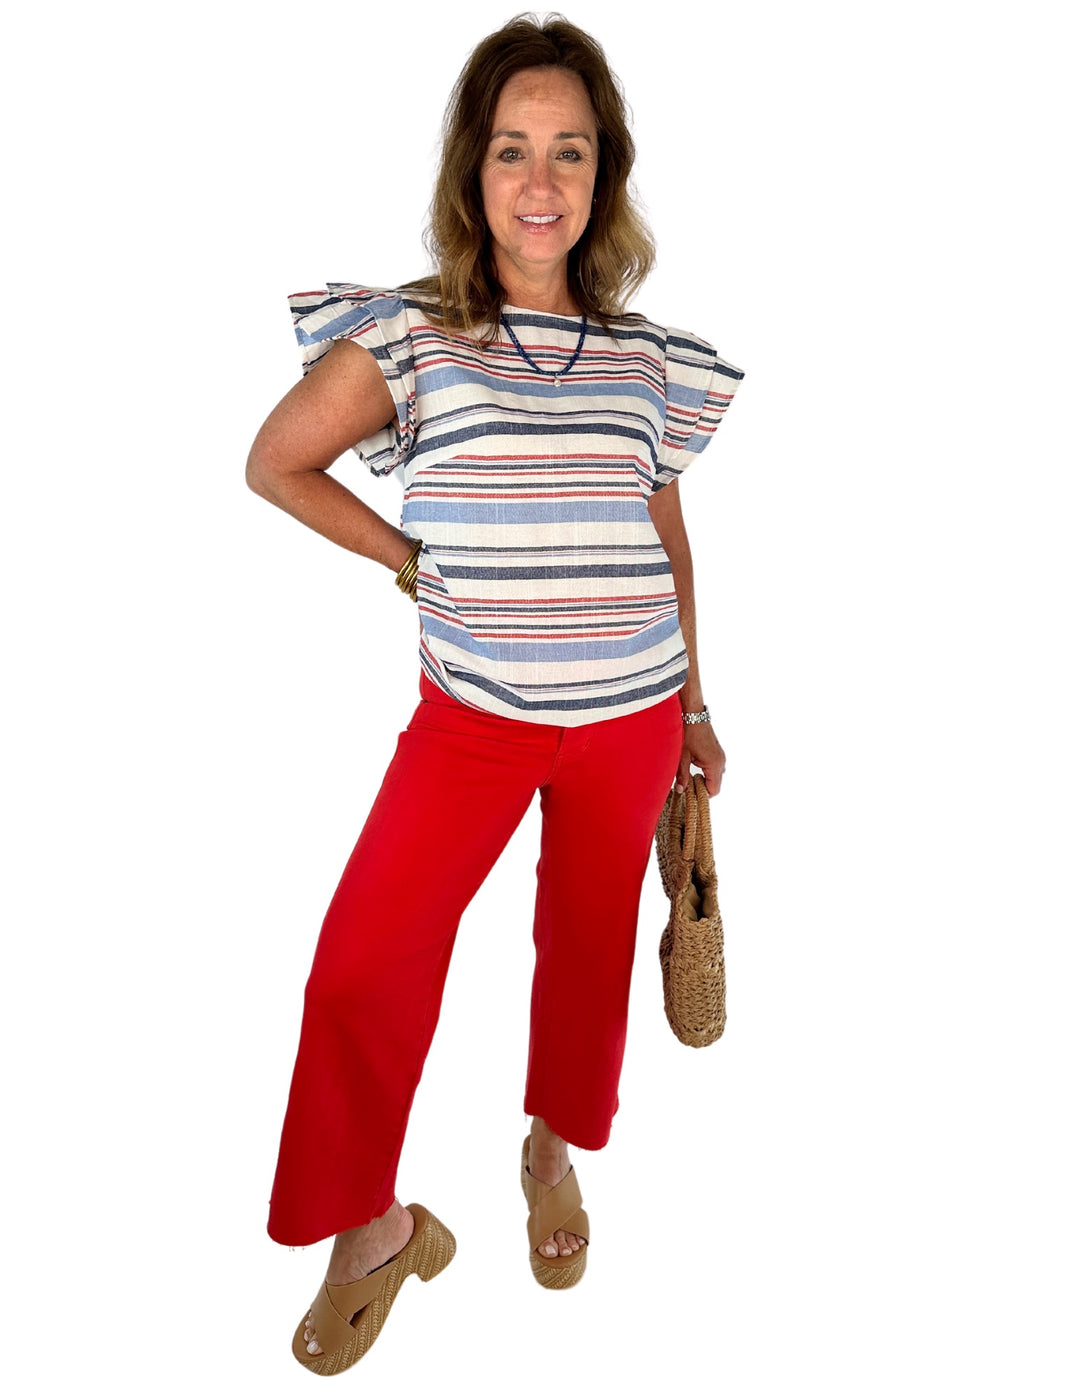 The Heritage Striped Top